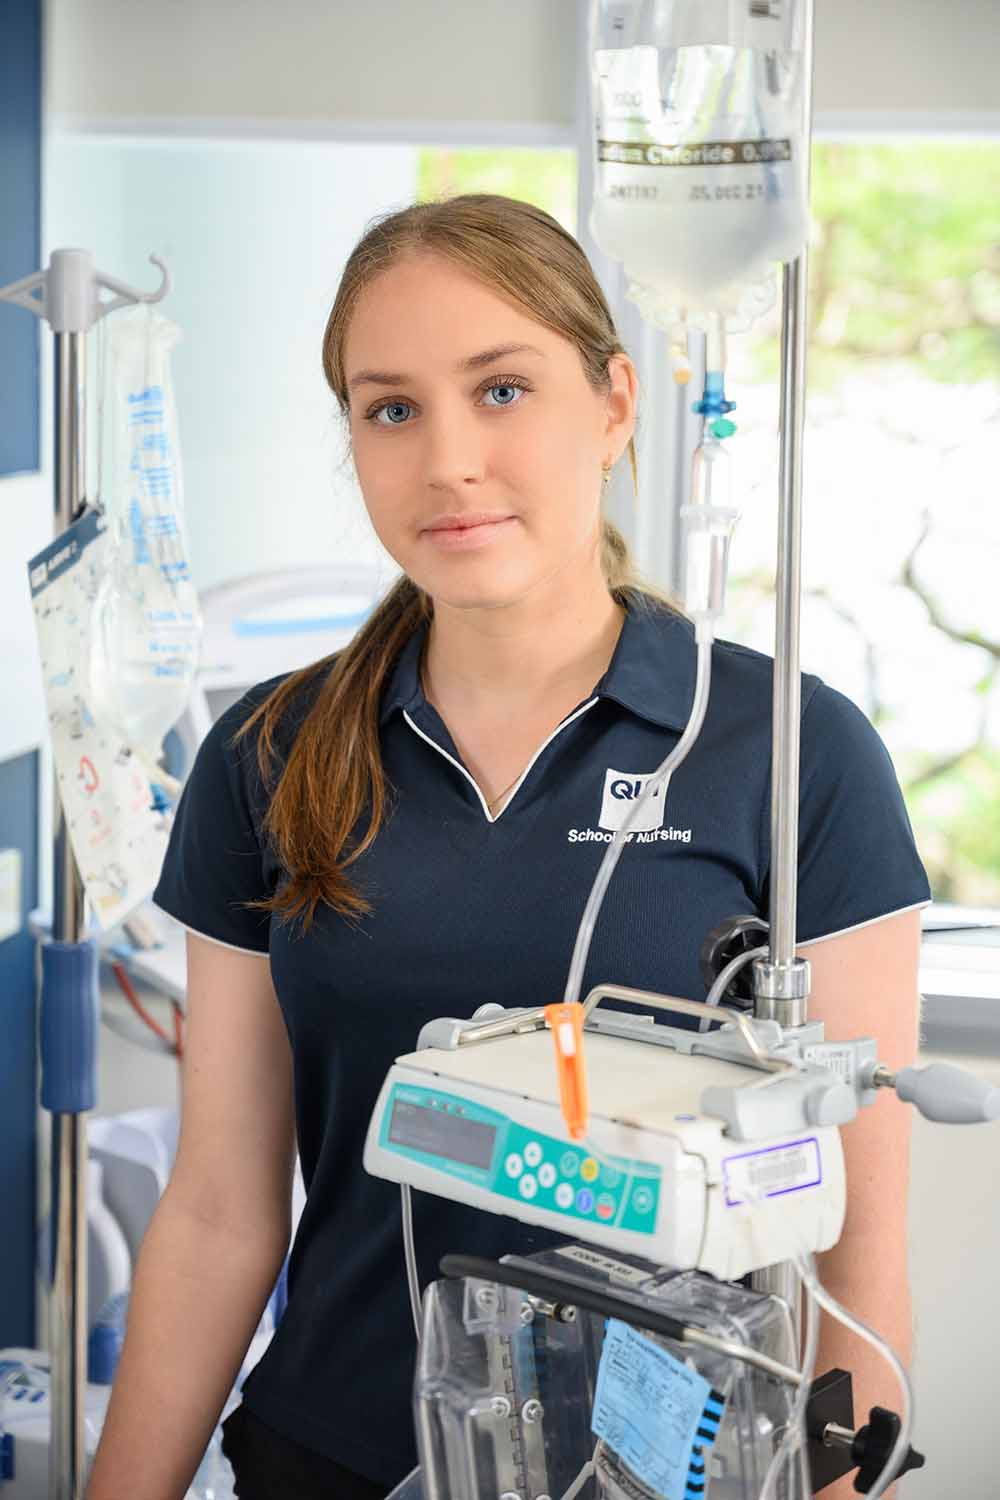 Sarah Evans, Indigenous scholarship recipient, wearing a nurses' uniform stands in front of a hospital bed and equipment.